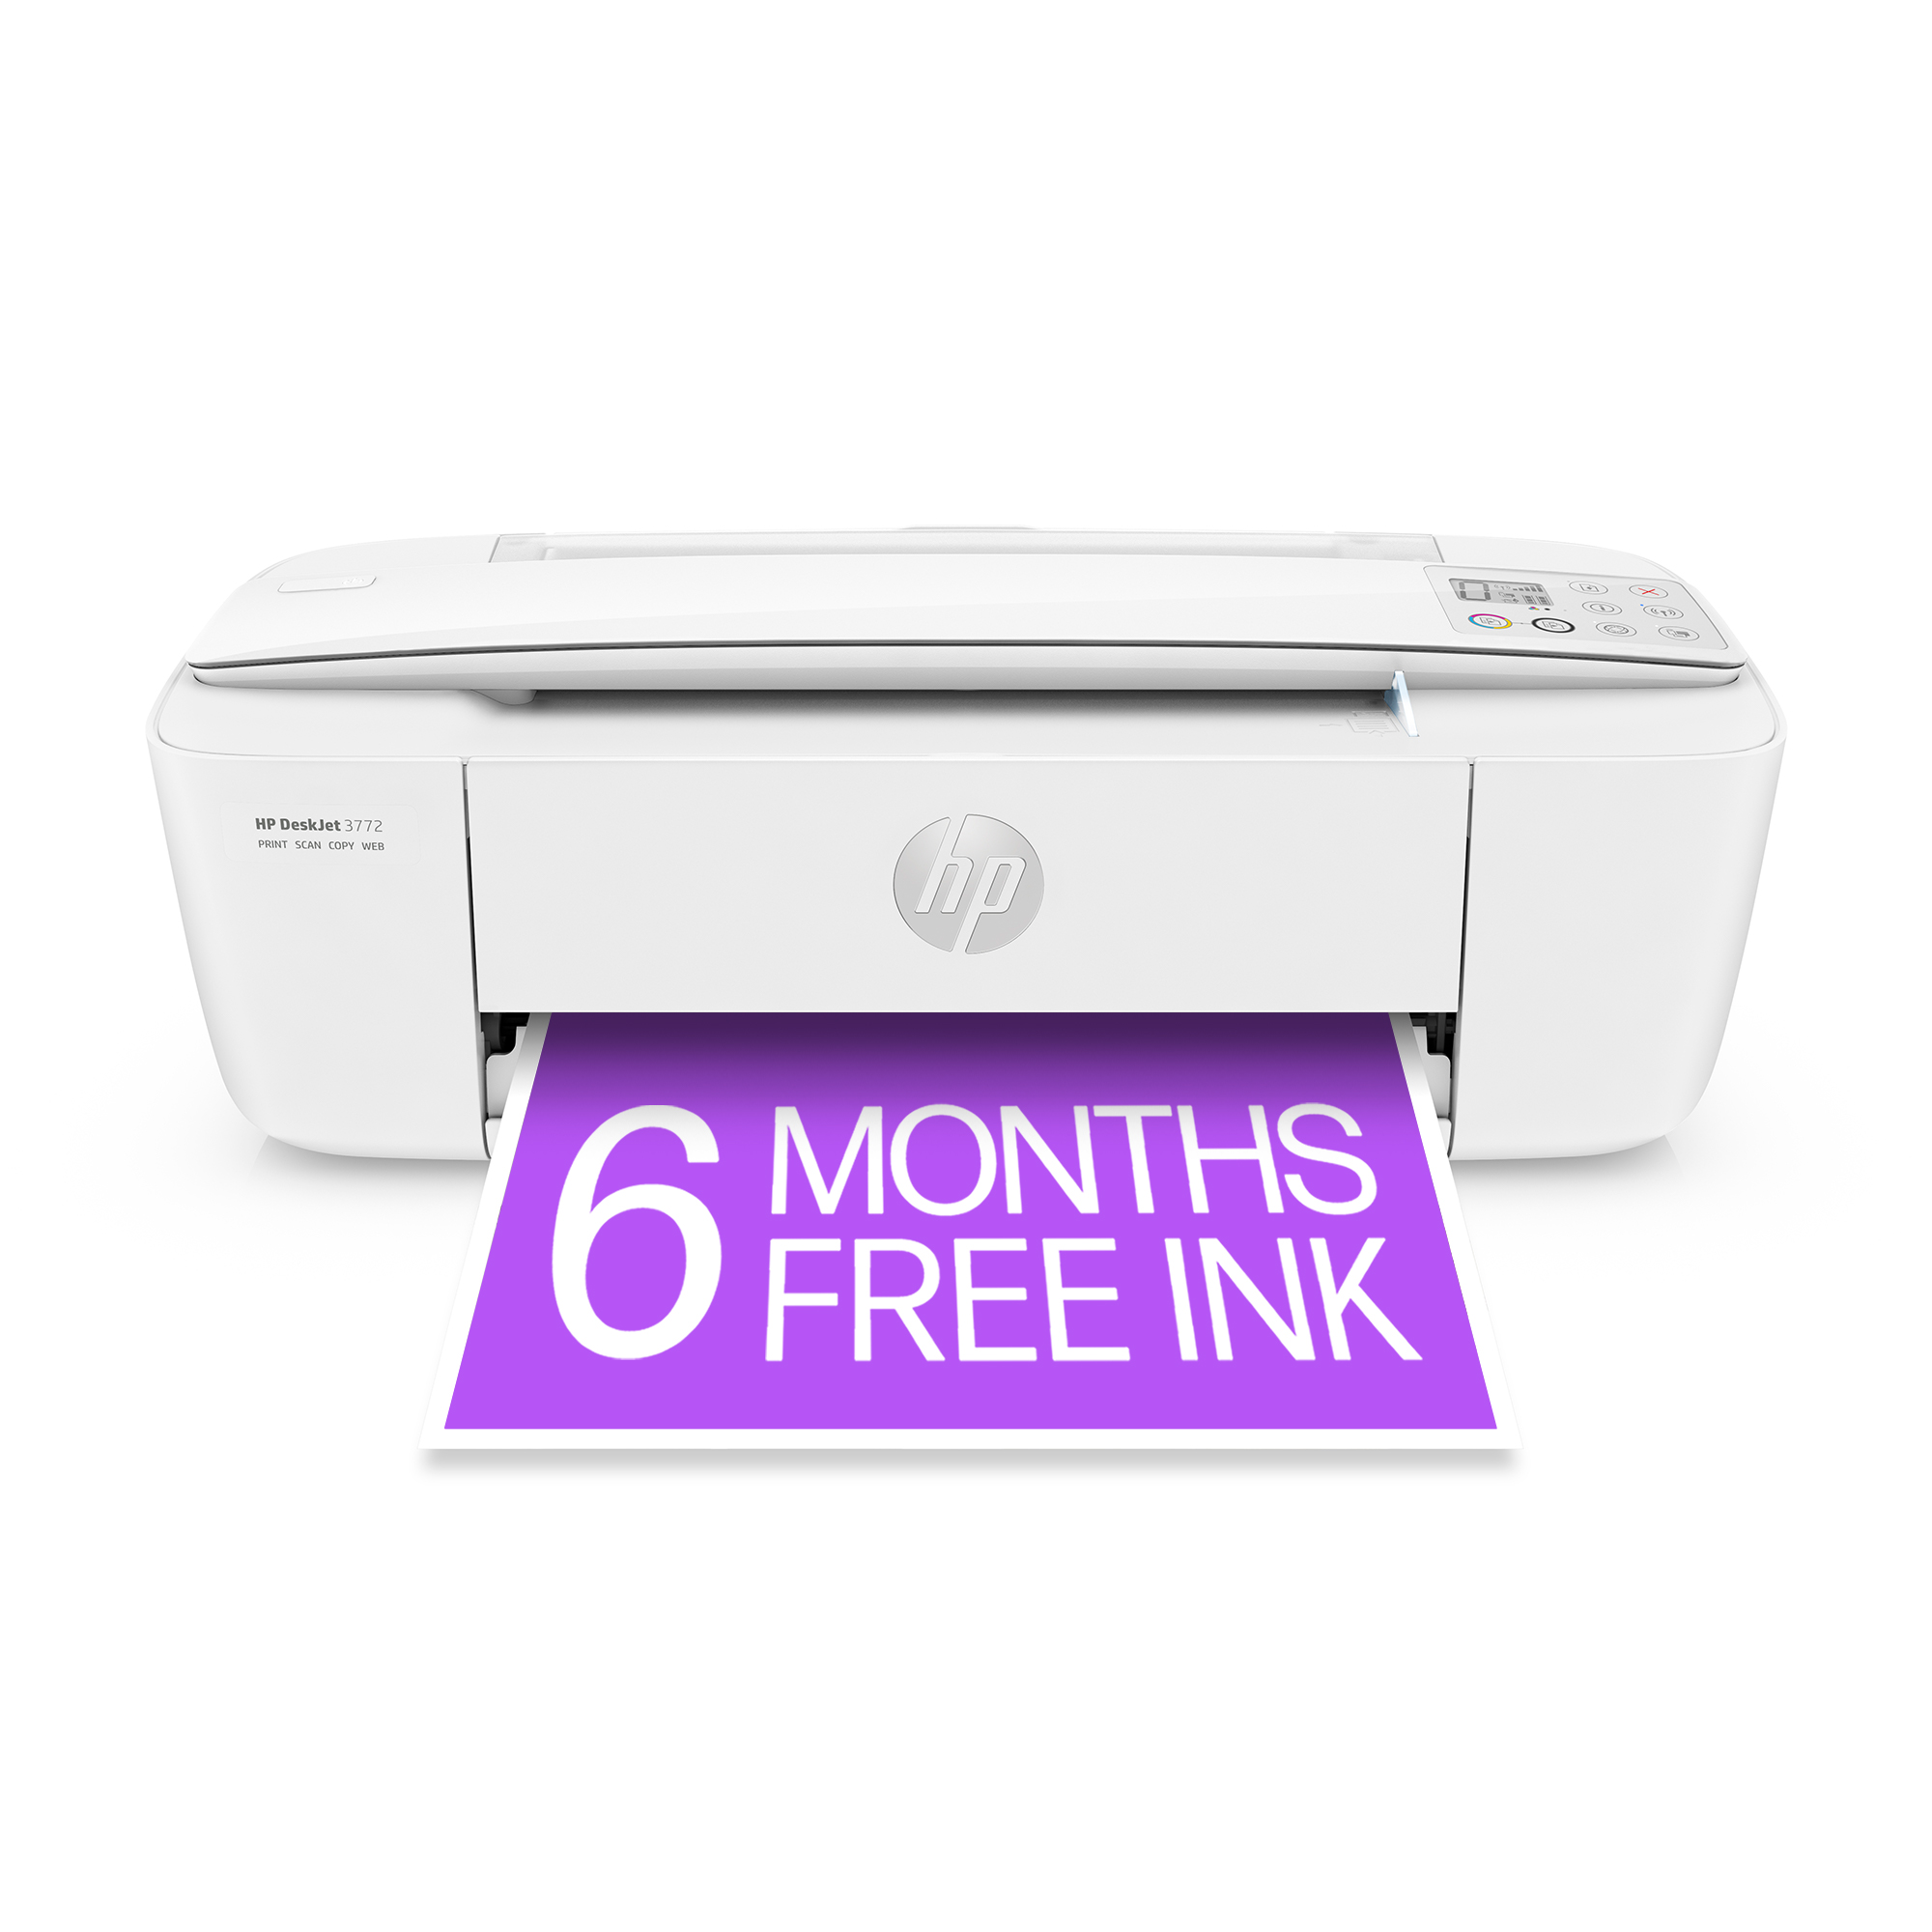 HP OfficeJet Pro 7740 Review 